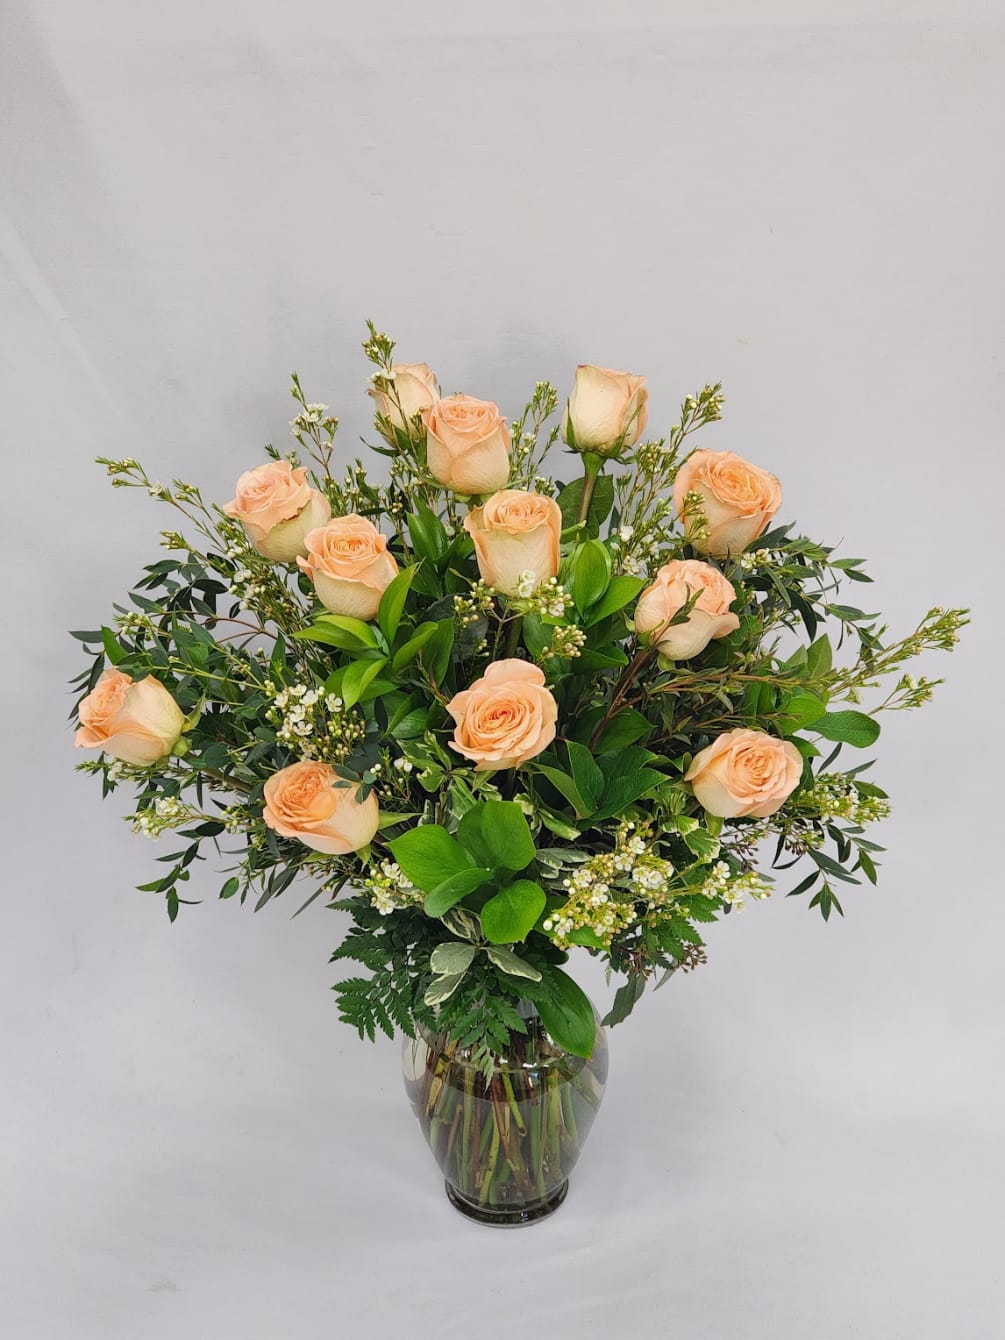 This arrangement if filled with one dozen long stem peach roses with